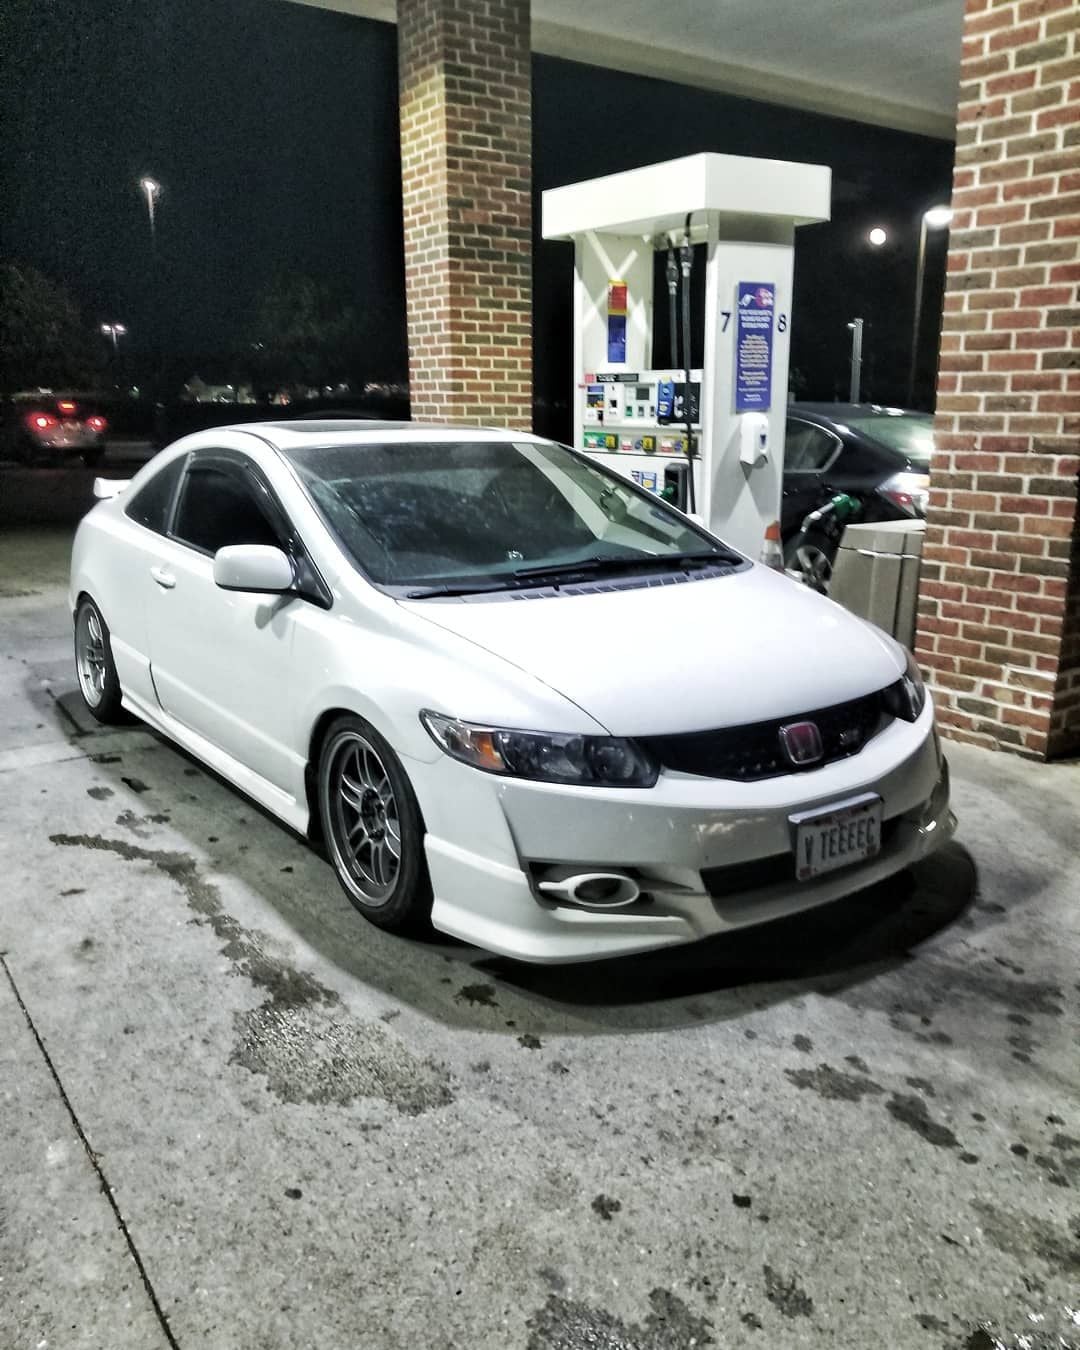 2009 Honda Civic - 2009 Civic SI - Used - VIN 2HGFG2159H702690 - 90,500 Miles - 4 cyl - 2WD - Manual - Coupe - White - Dublin, OH 43017, United States